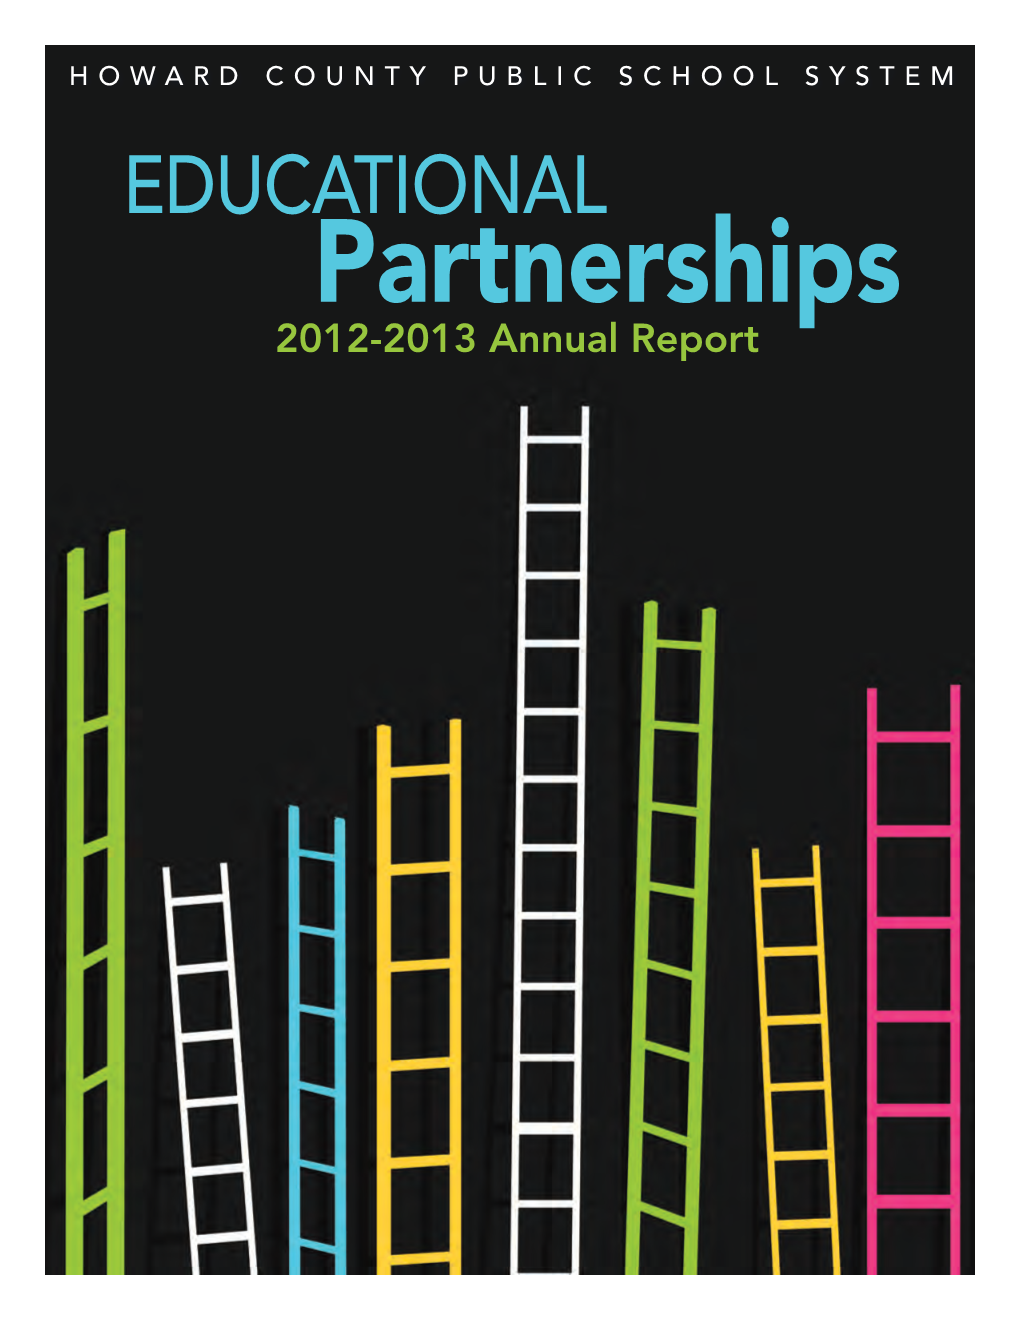 Educational Partnerships Annual Report Reflects Partnerships Active Between July 1, 2012 and June 30, 2013